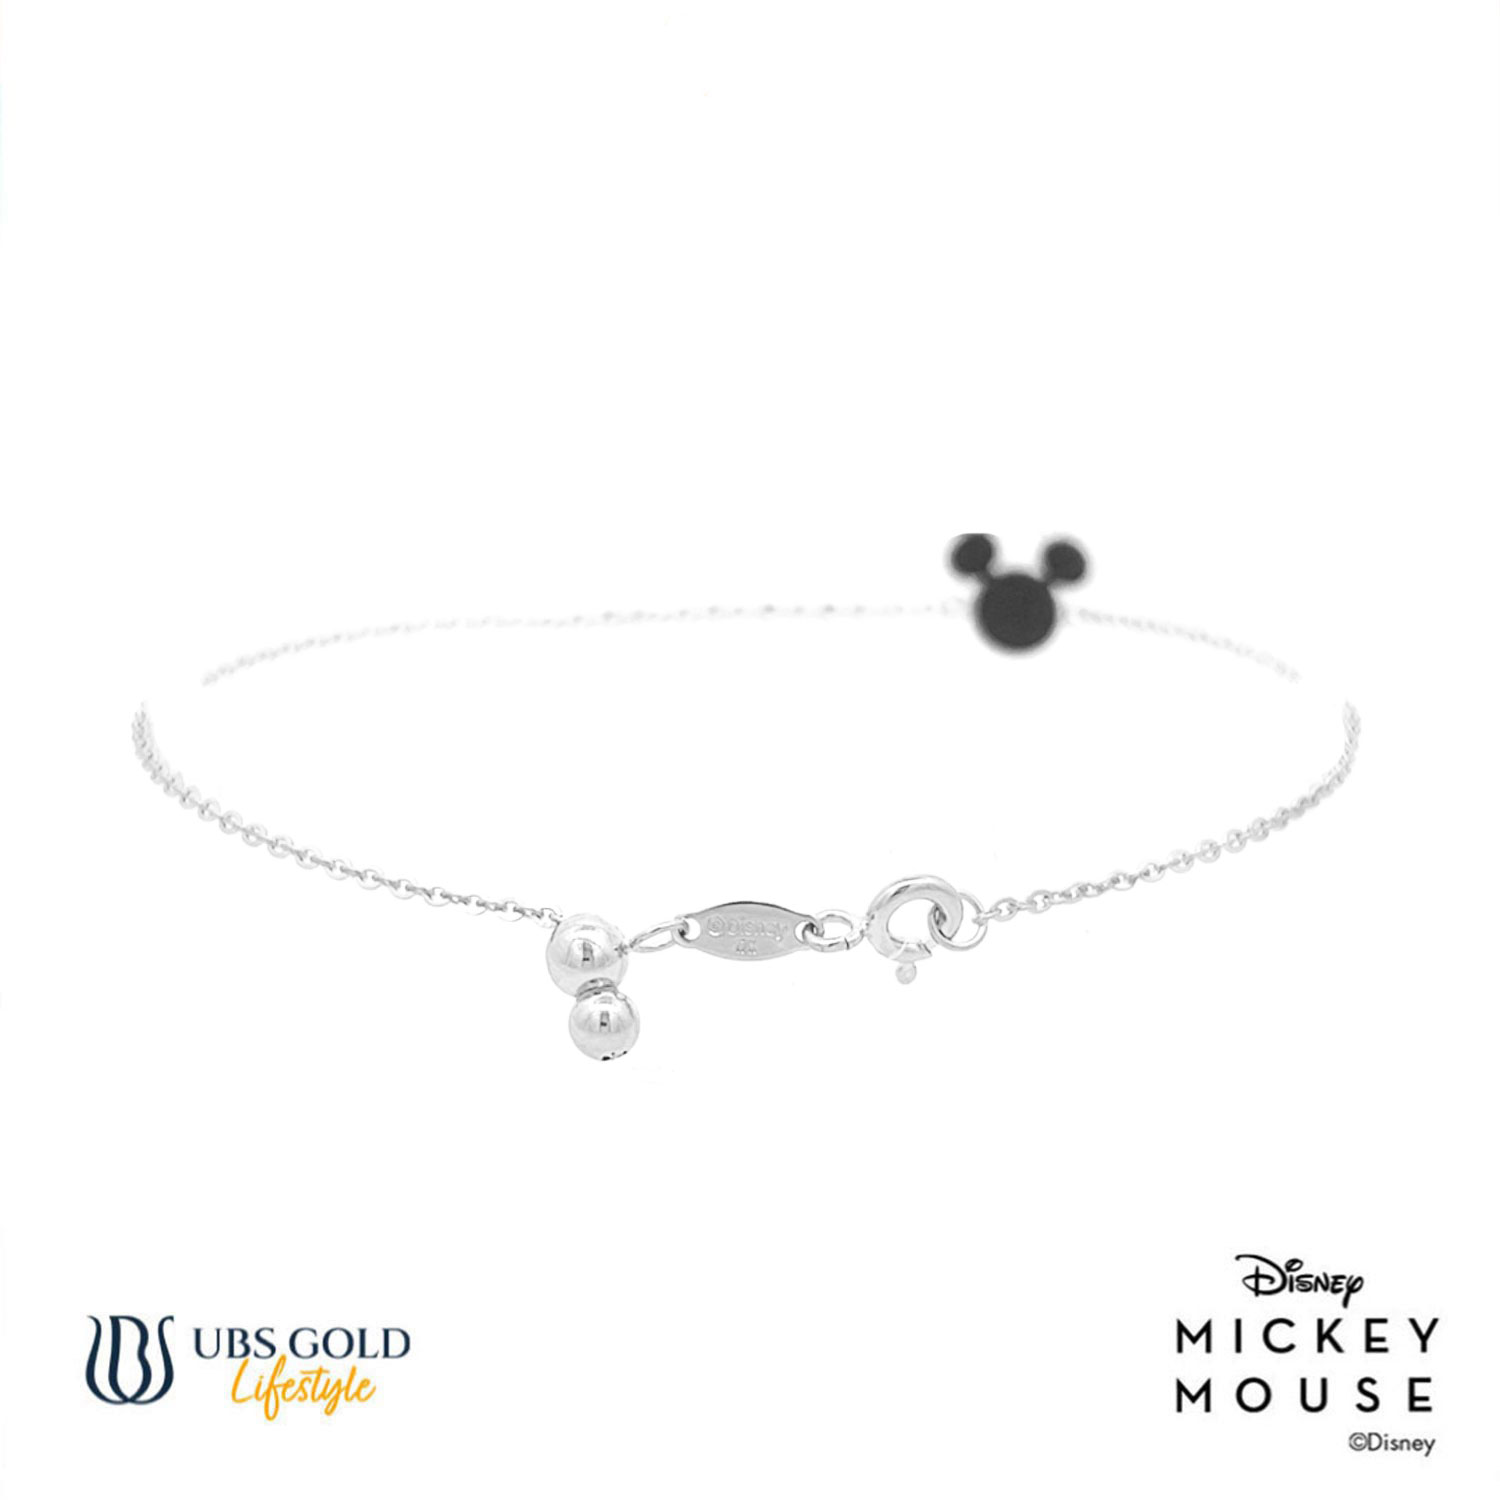 UBS Gold Gelang Emas Disney Mickey Mouse - Kgy0113 - 17K